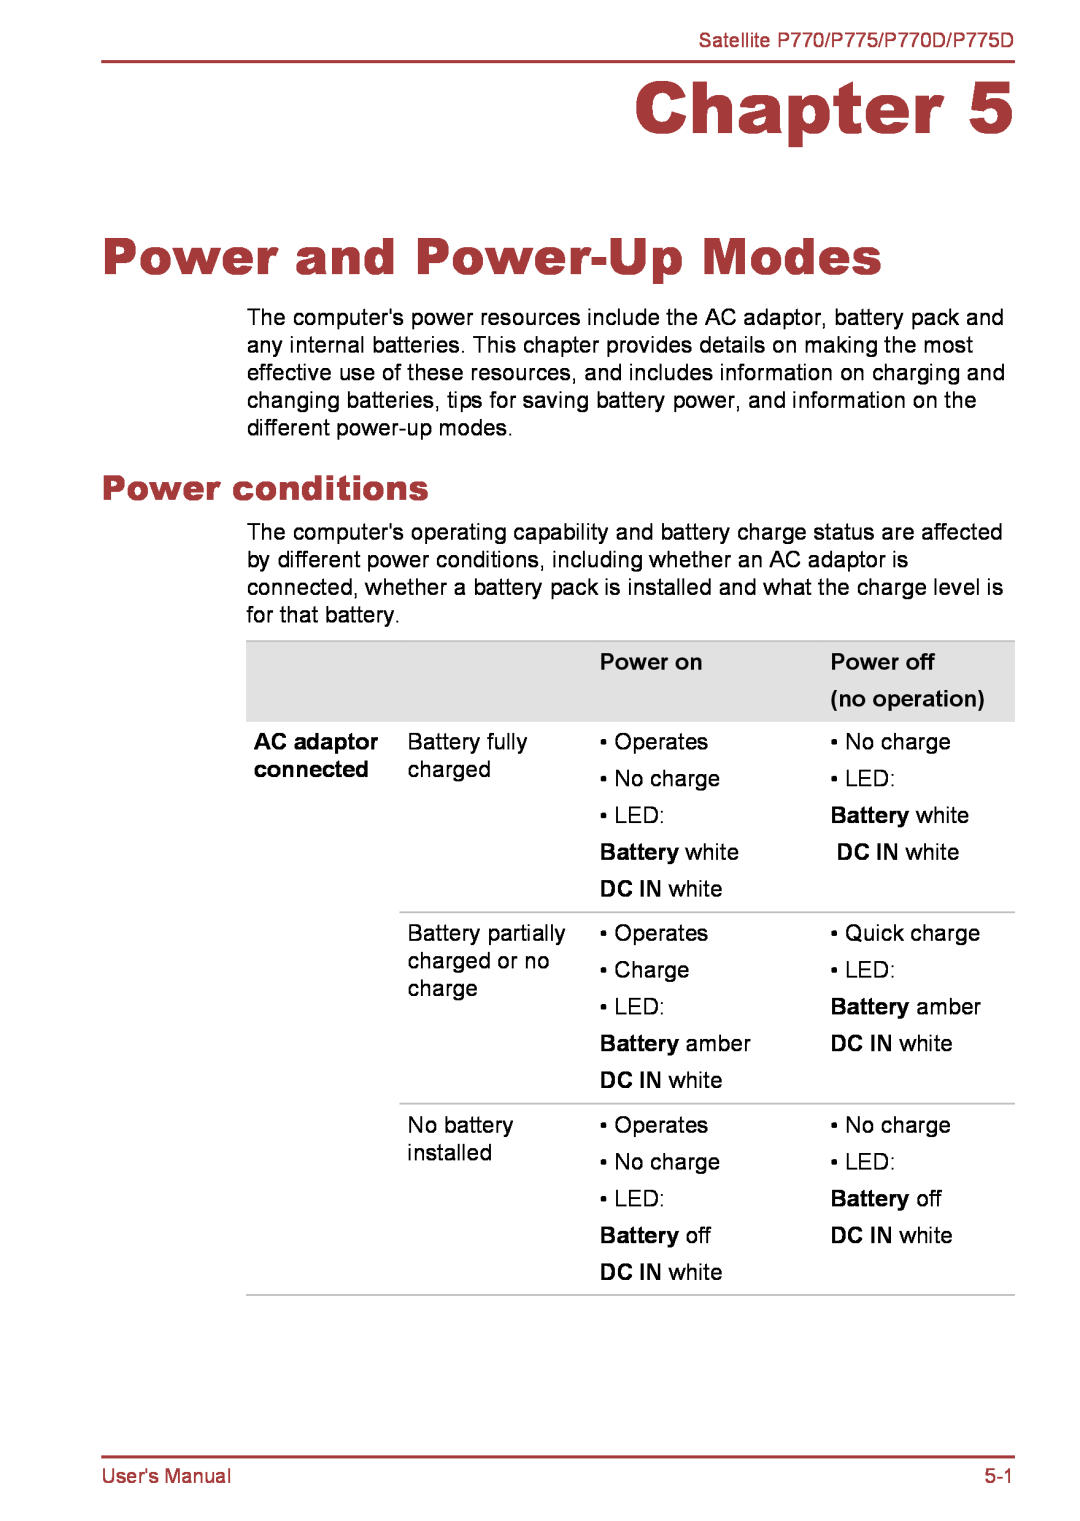 Toshiba P770 Power and Power-Up Modes, Power conditions, Power on, Power off, no operation, AC adaptor, connected, Chapter 